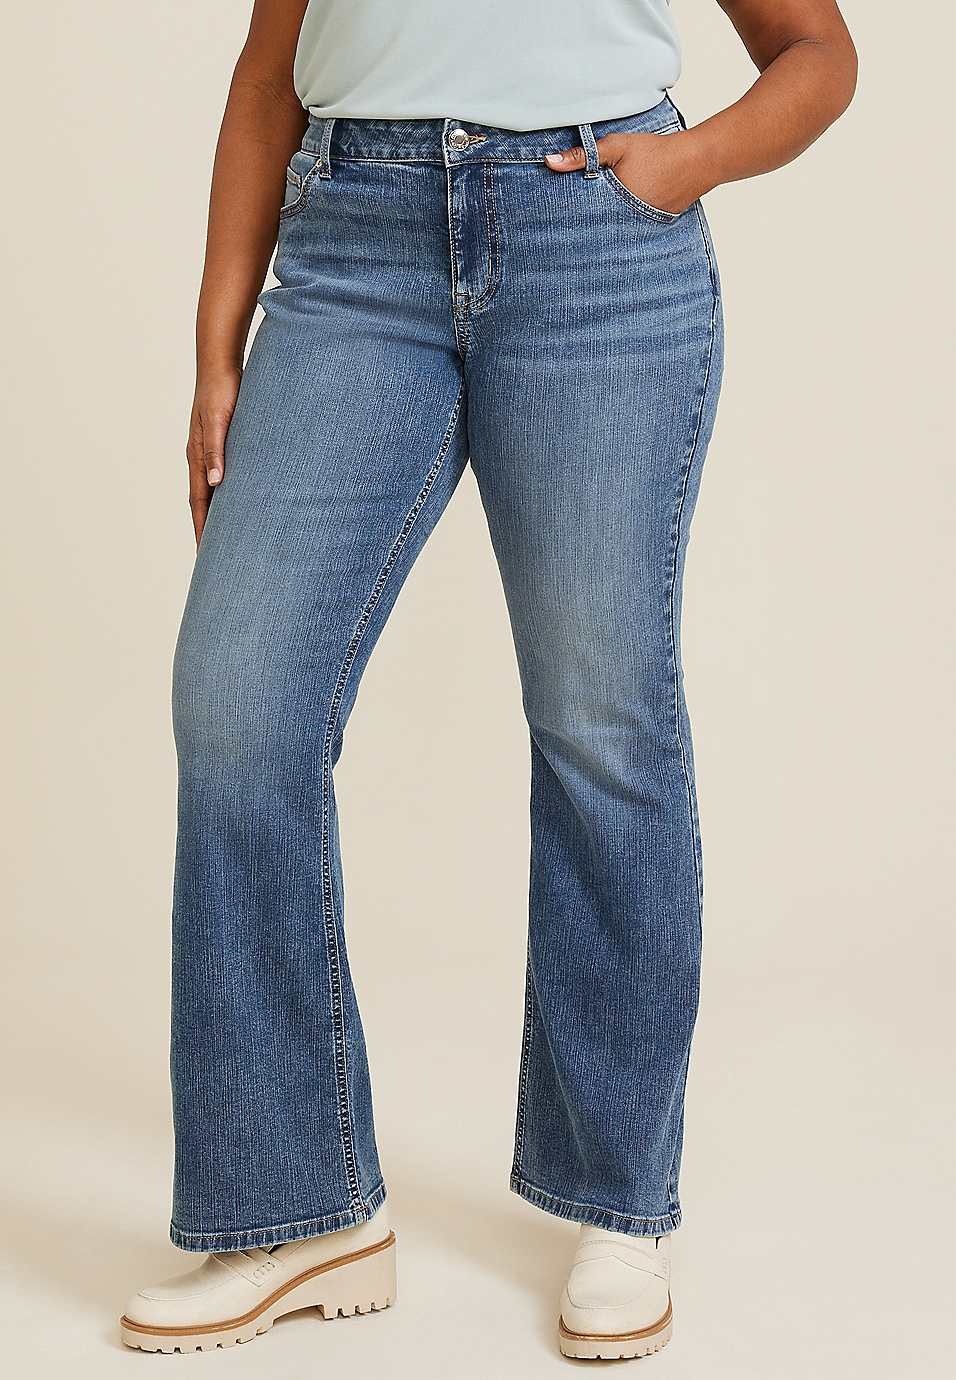 Bell Bottom Jeans for Women High Waisted Stretch Classic Flare